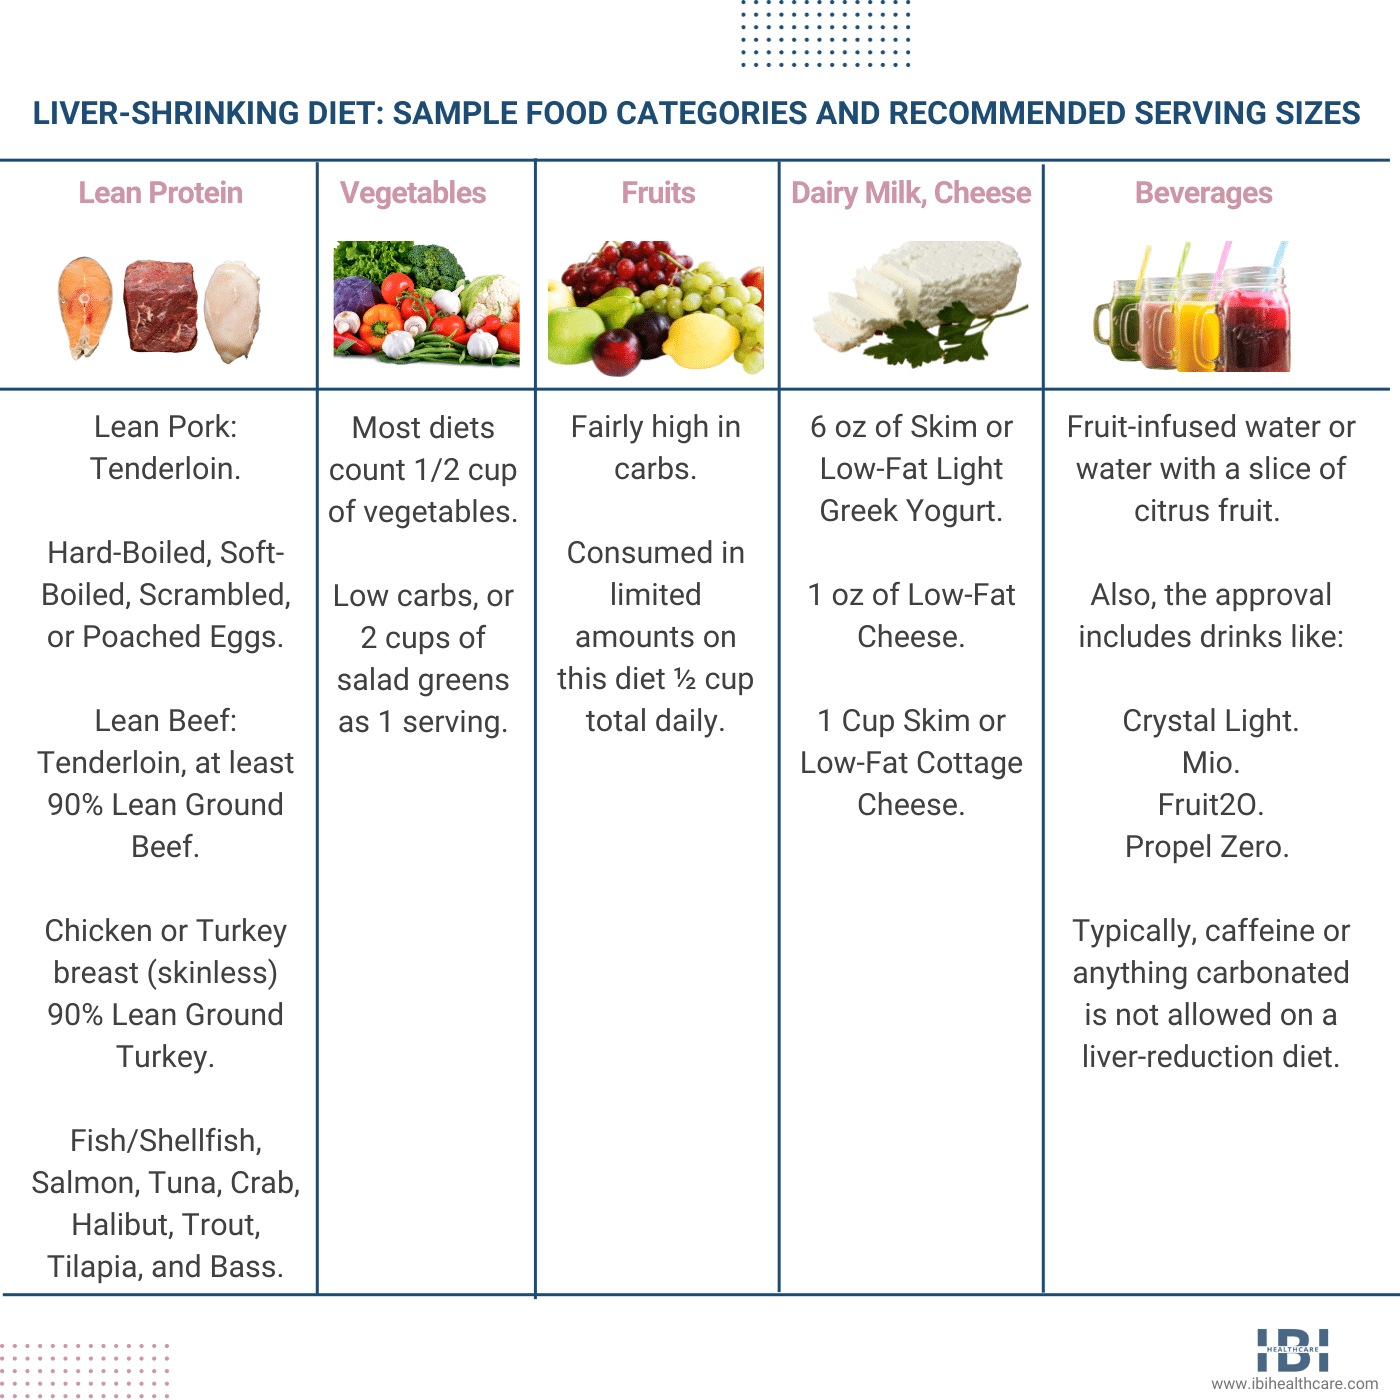 https://www.ibihealthcare.com/wp-content/uploads/2022/01/Liver-Shrinking-Diet-Sample-Food-Categories-and-Recommended-Serving-Sizes.png